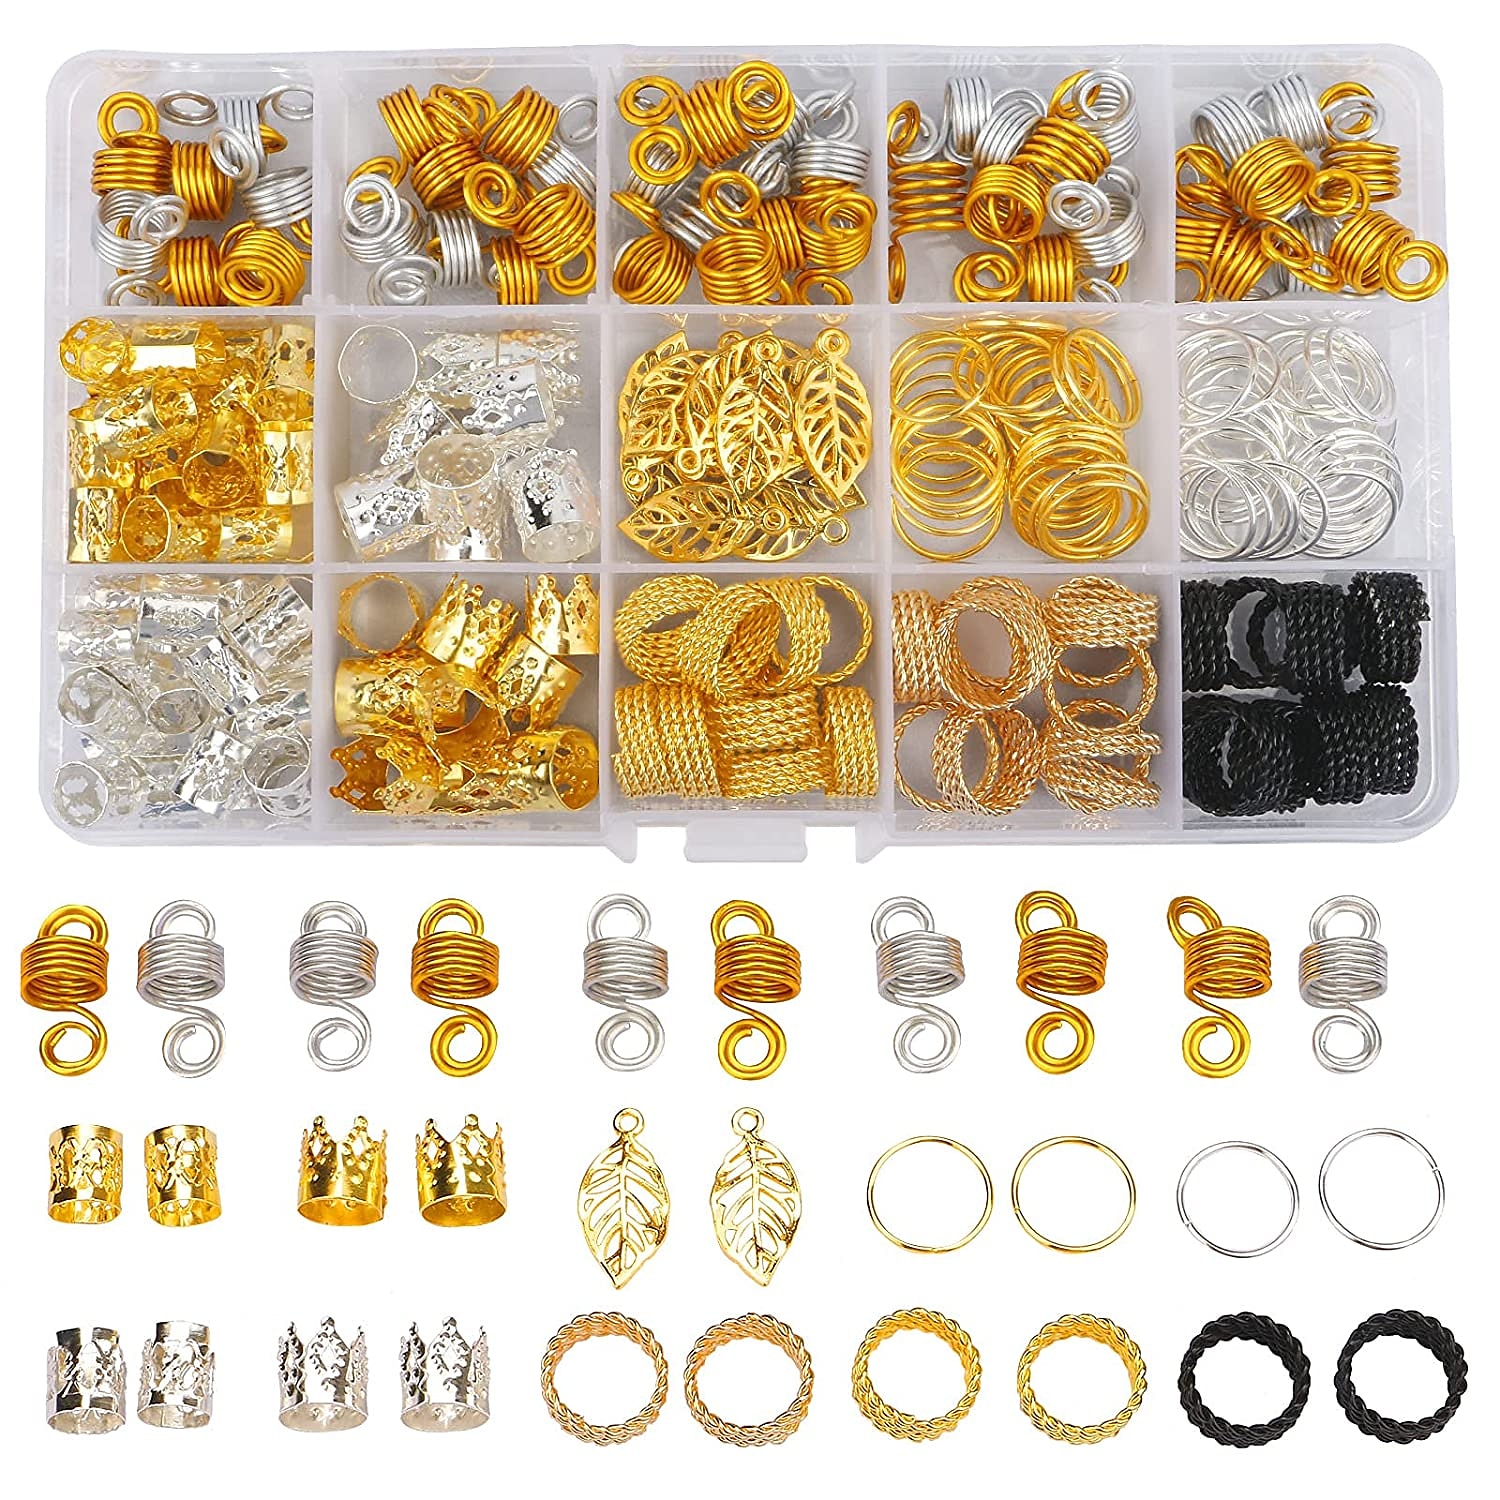 200PCS Beads for Hair Braids Hair Jewelry for Women Braids Metal Gold Braids  Rings Cuffs Clips for Dreadlock Accessories Hair Decorations 8781171 2023 –  $